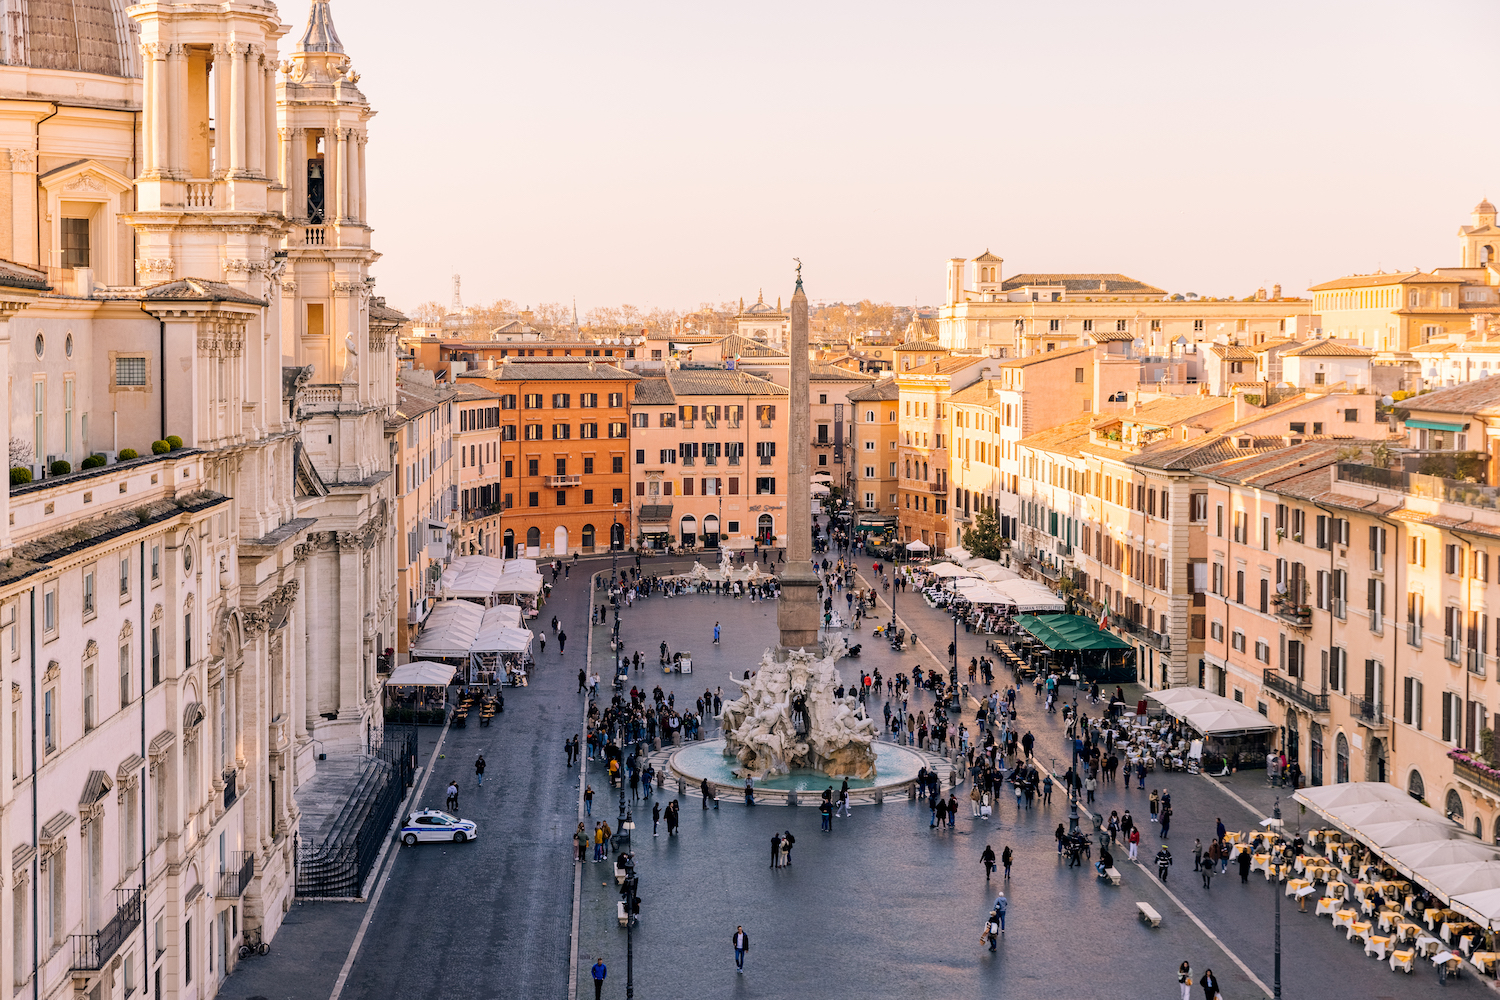 Rome skyline and Piazza Navona at sunset seen from above, Lazio, Italy.